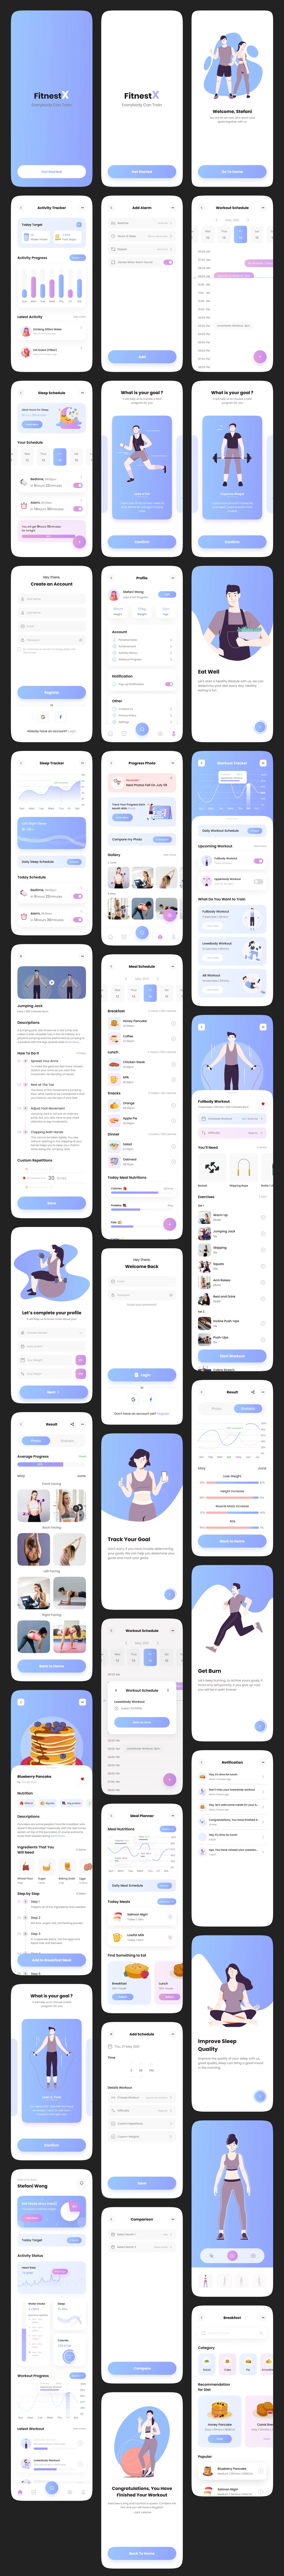 Fitness Free App UI Kit for Figma - It's your 3-in-1 fitness tracker. It helps you track your workout, meal, and sleep - making it easy to see your overall progress.